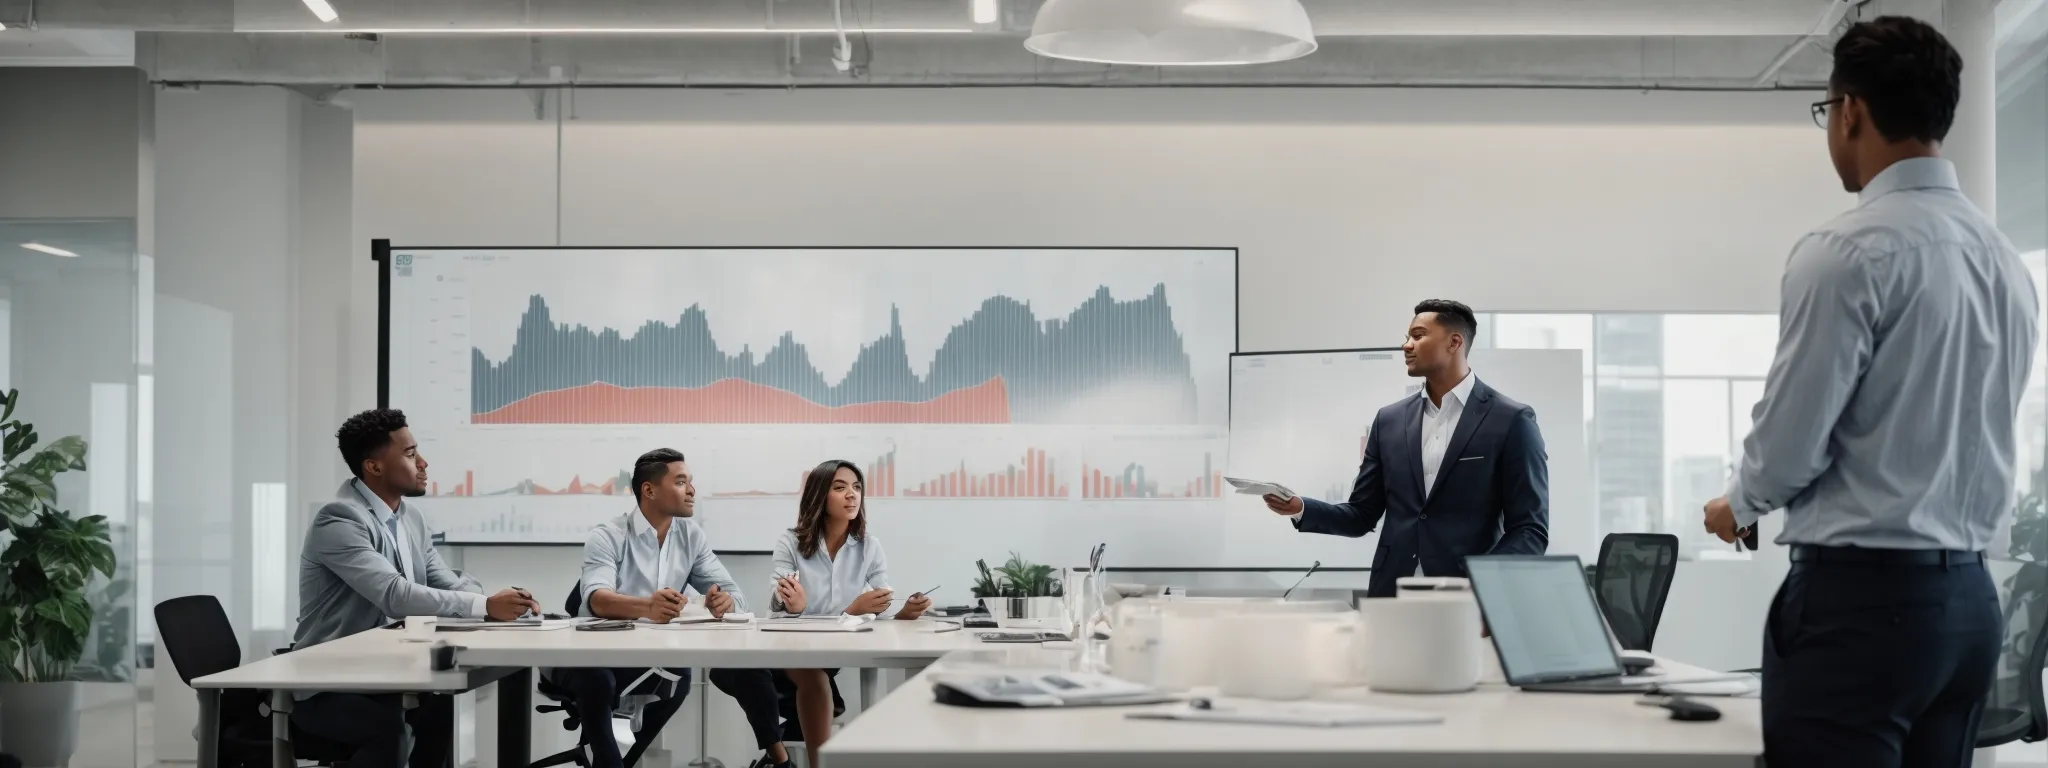 a confident professional presenting growth charts to a team in a bright, modern office.